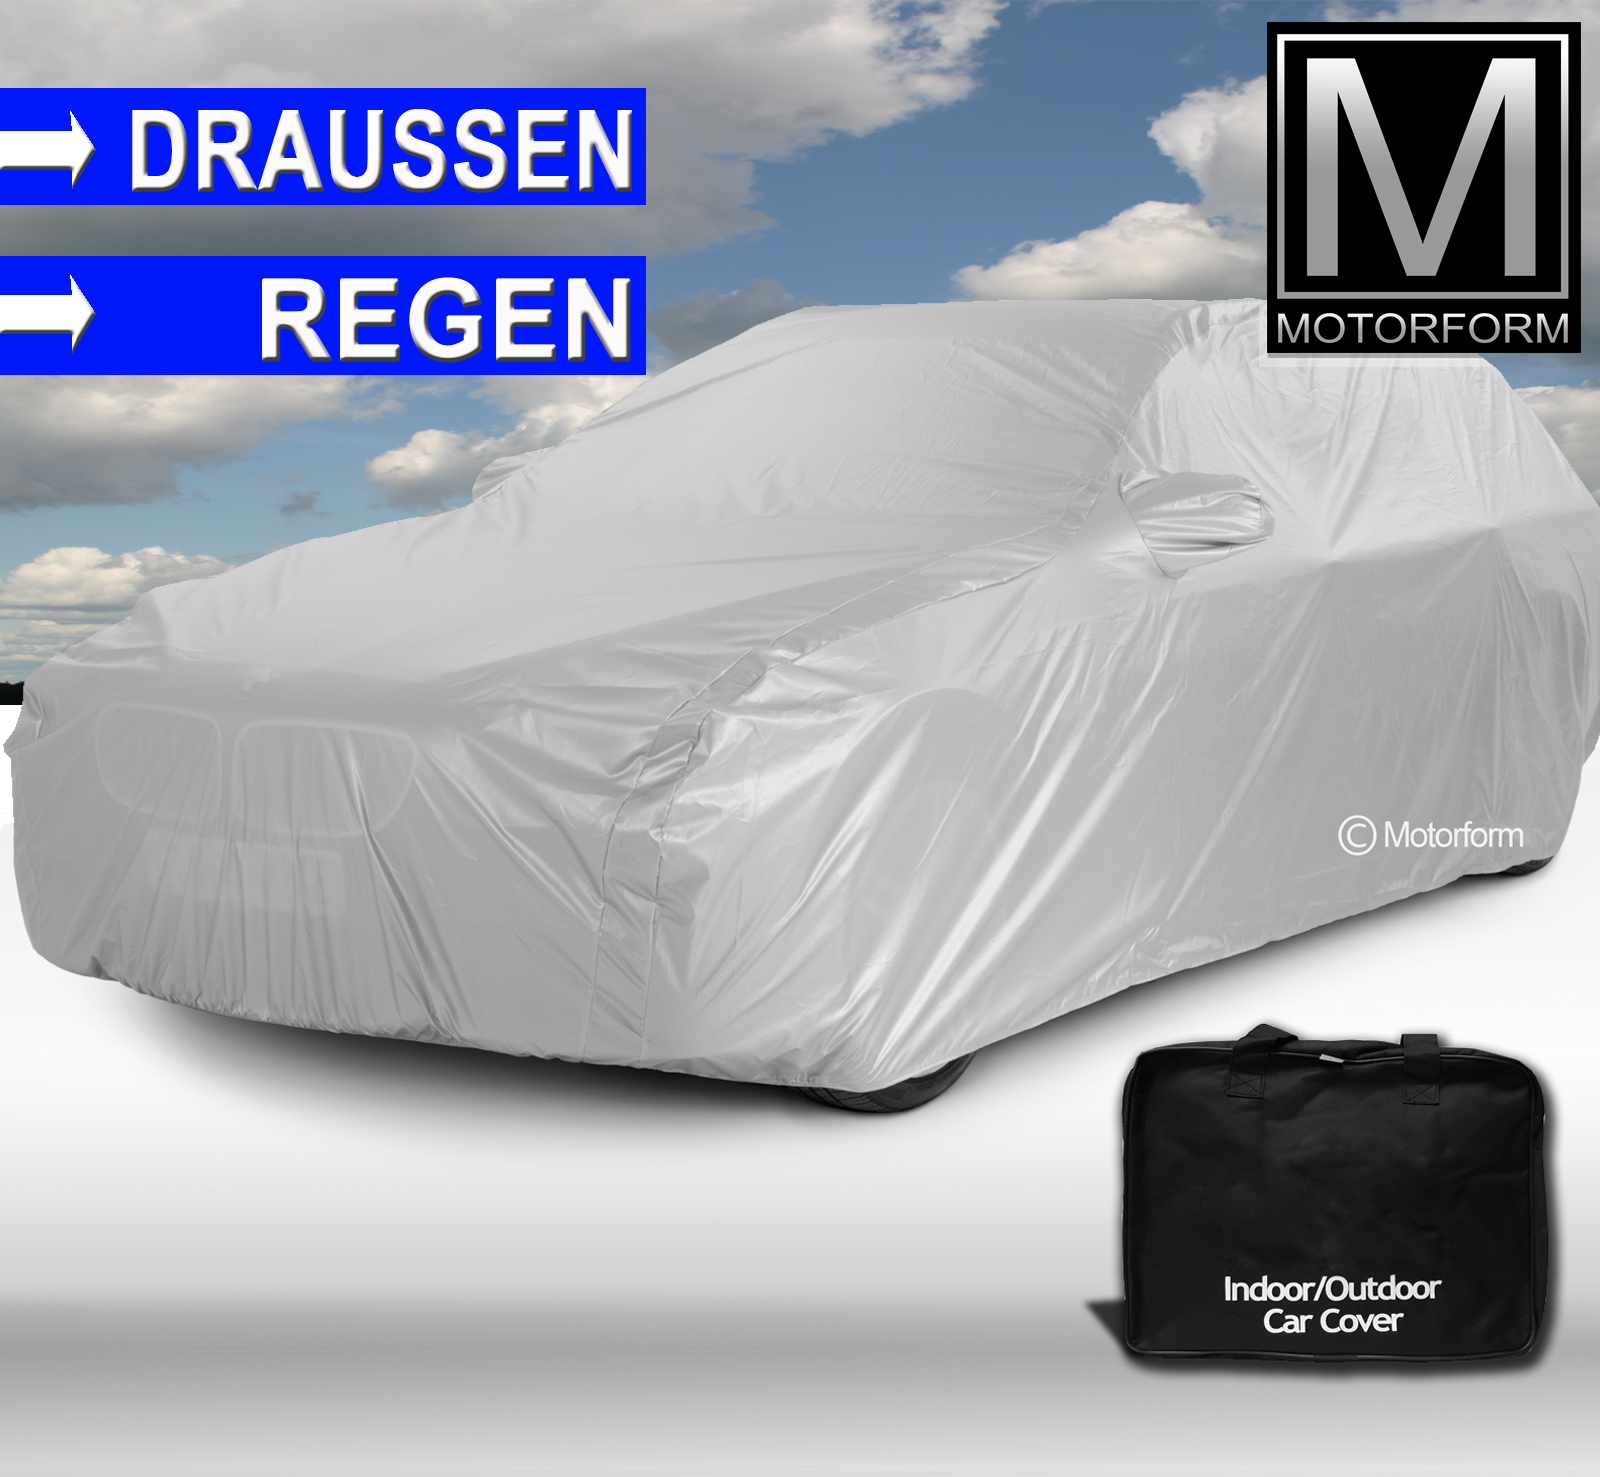 Voyager Outdoor Car Cover for Mercedes C-Class W202 Estate (1996